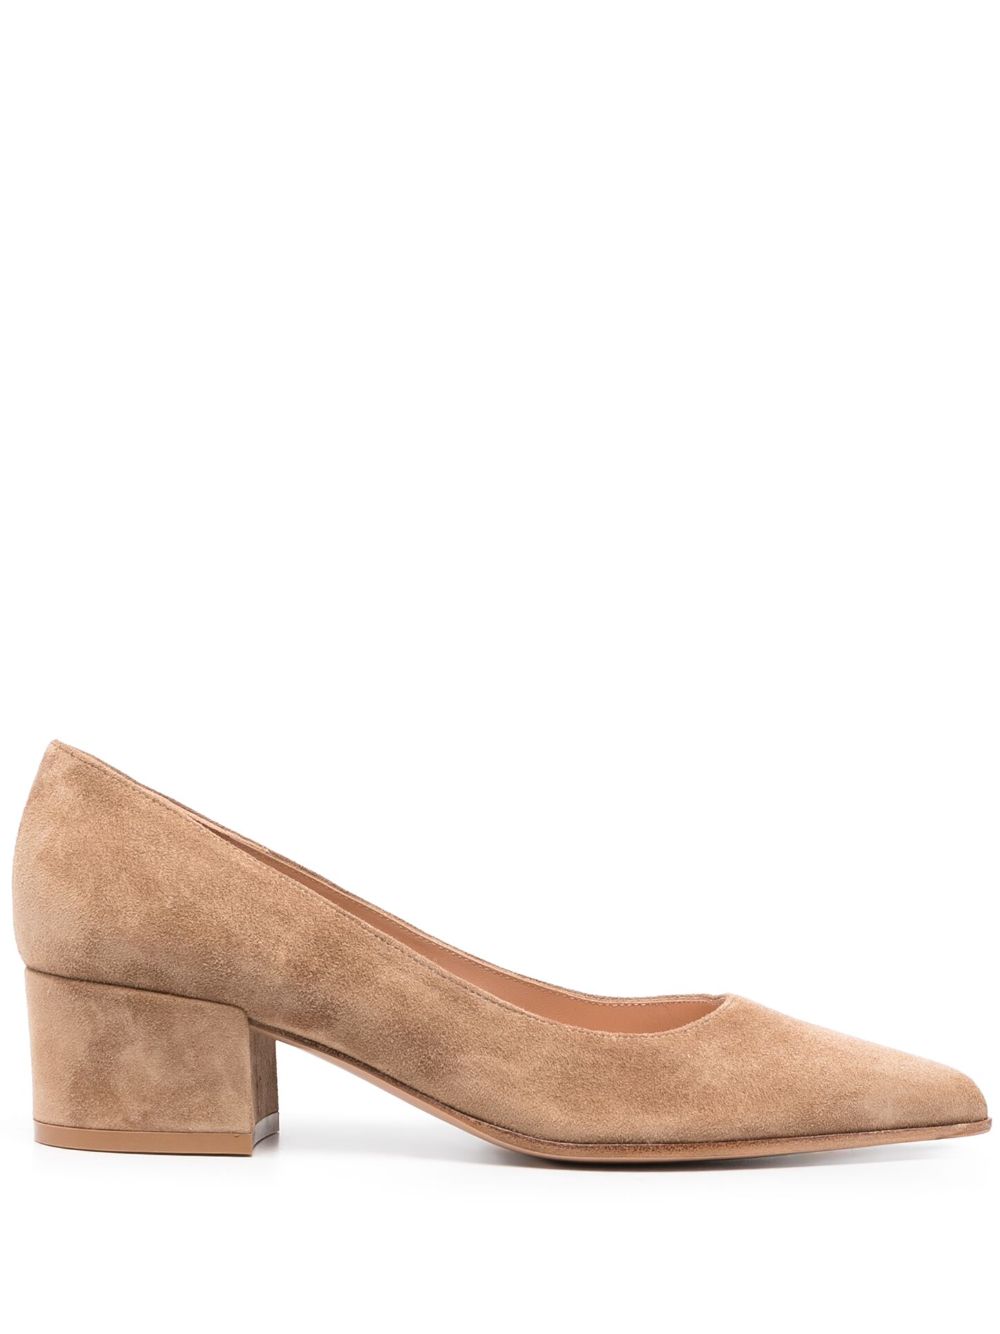 Gianvito Rossi With Heel Camel